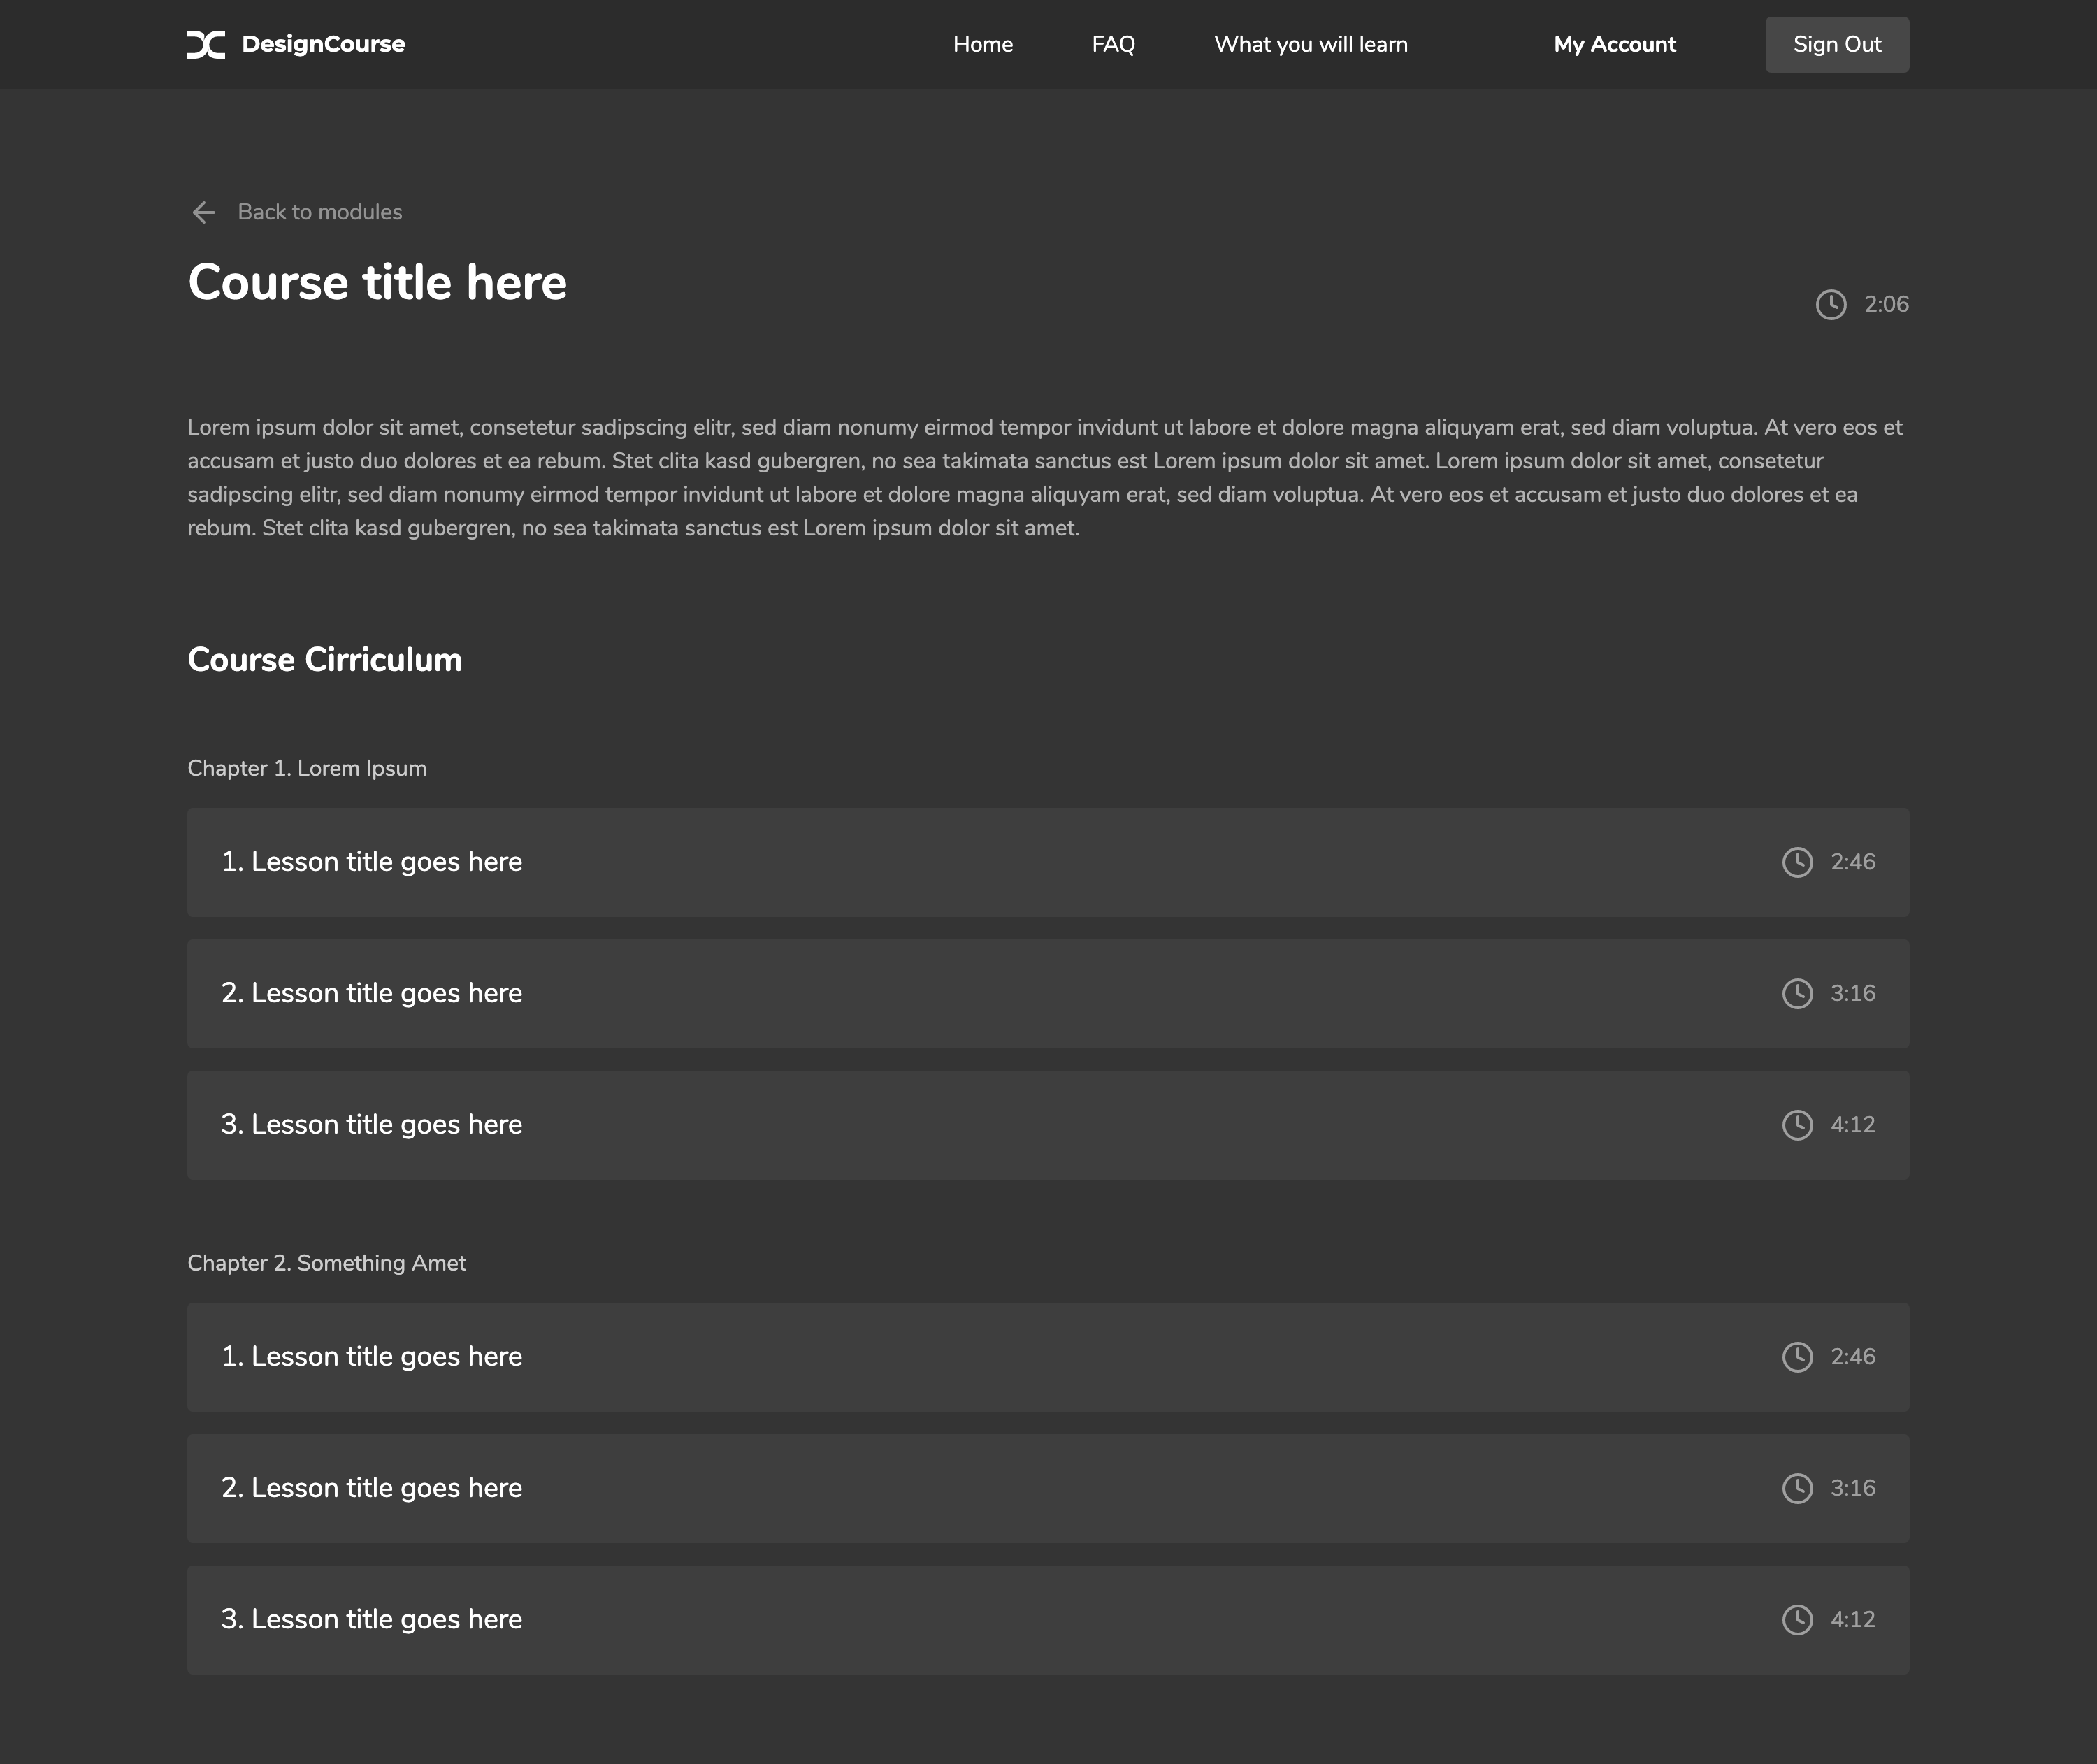 Course view, listing each lesson in the course